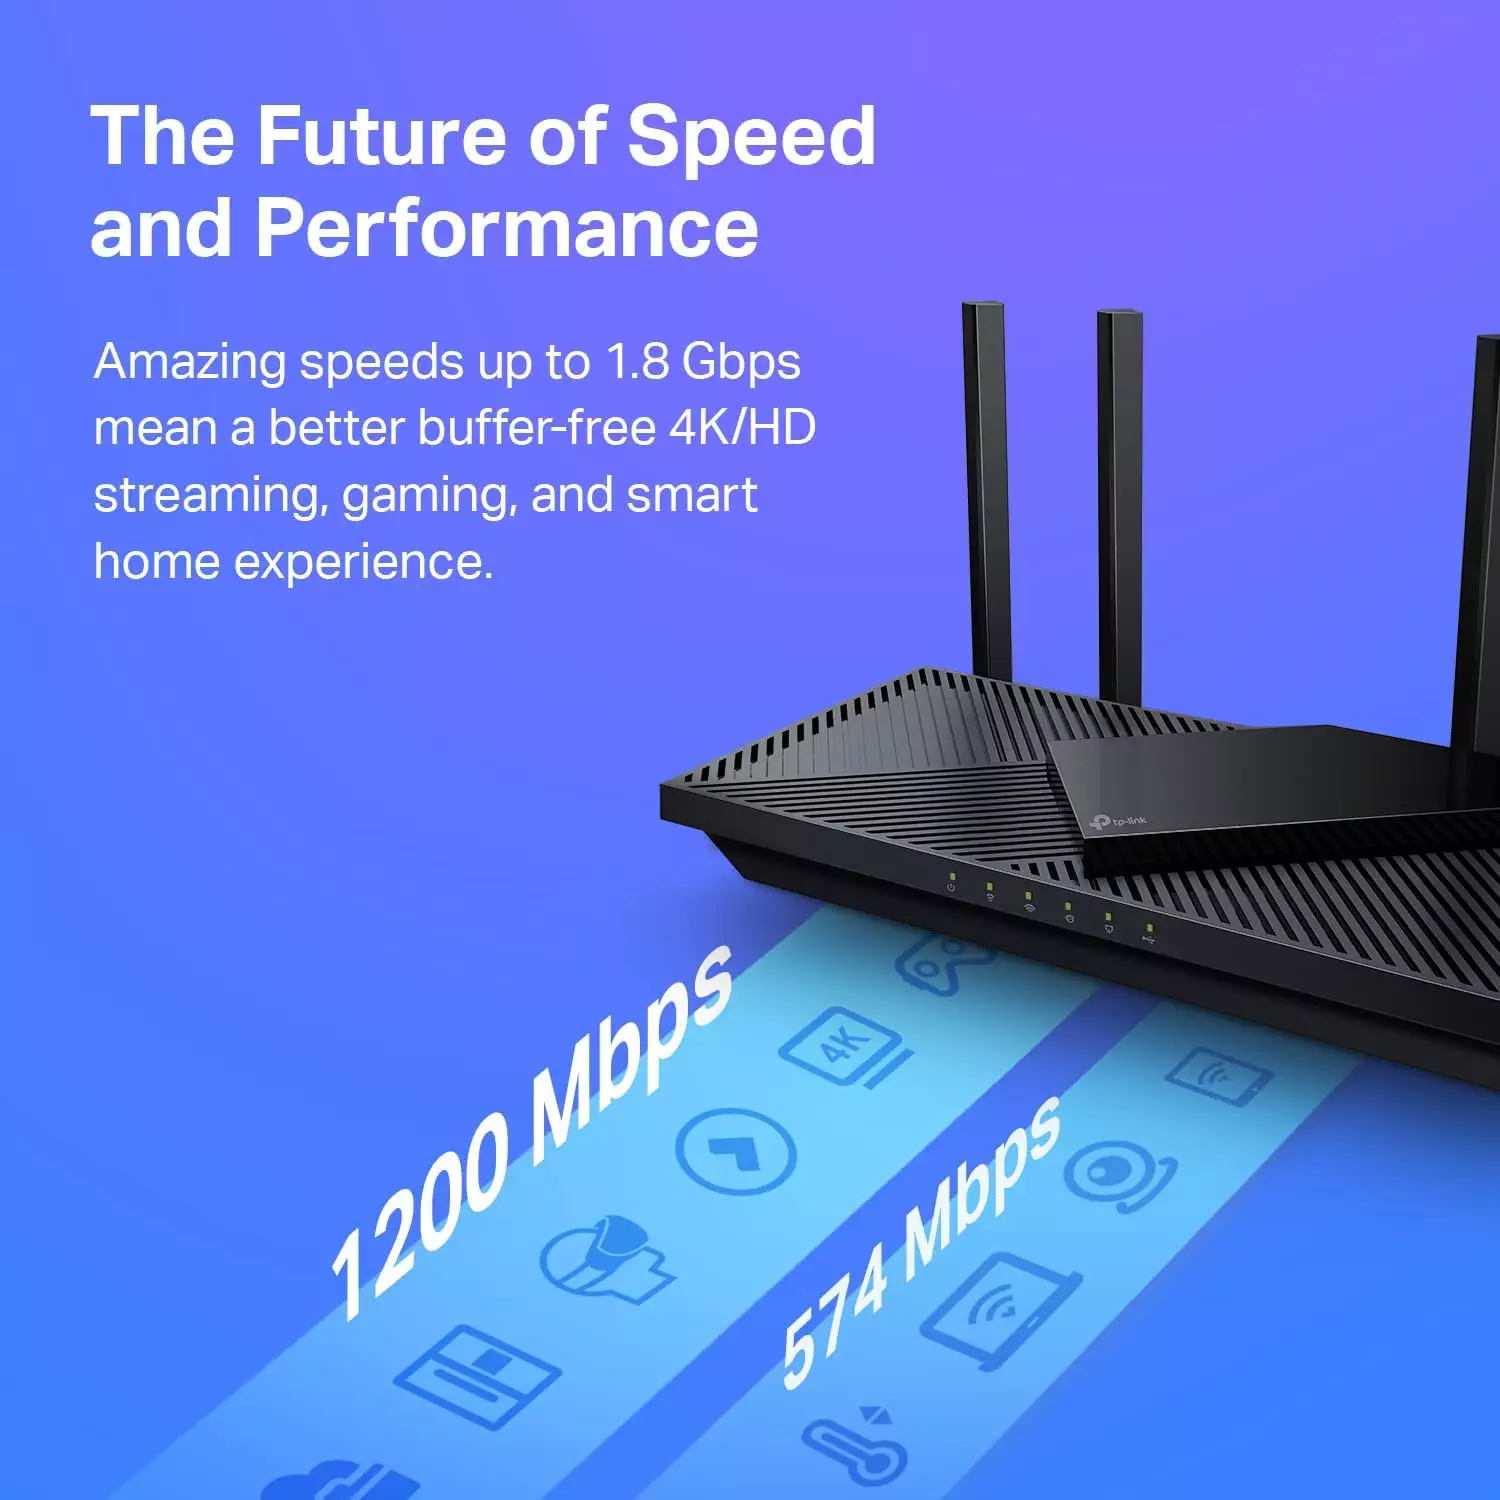 The Unbelievable Tplink Ax1800 Wifi 6 Router Is Definitely The Best There Is